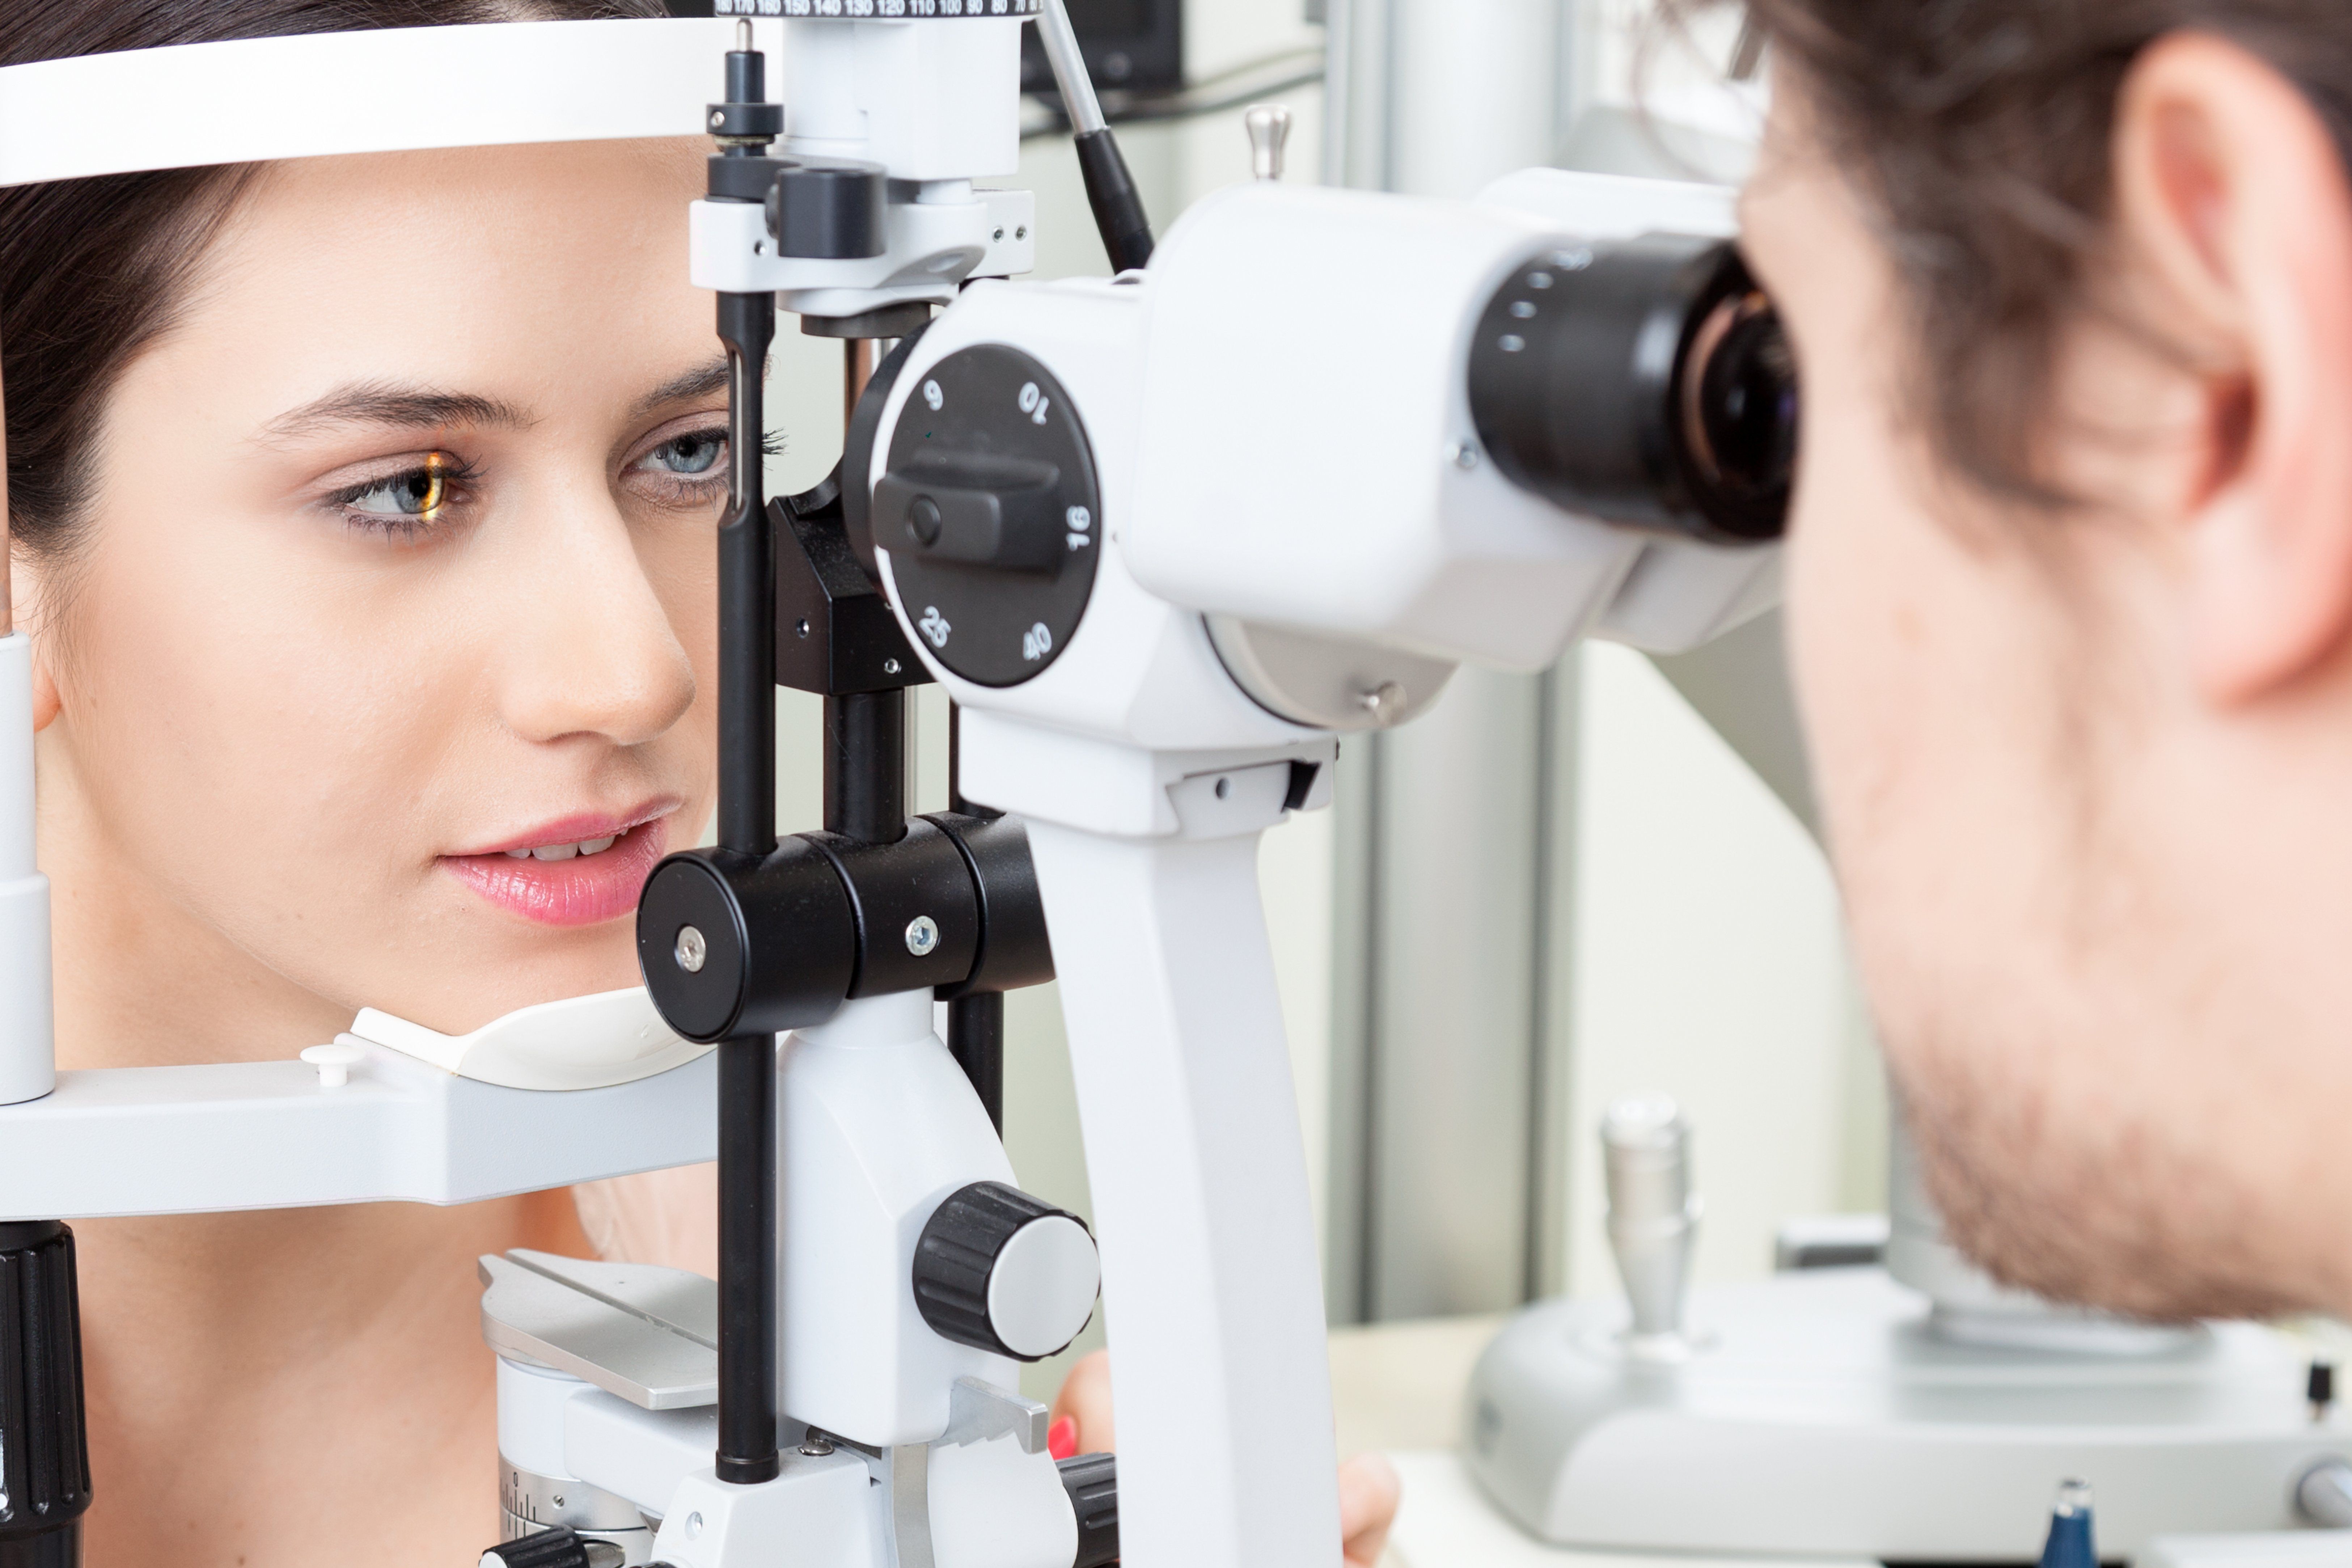 Contact Lens Exam: What to Expect